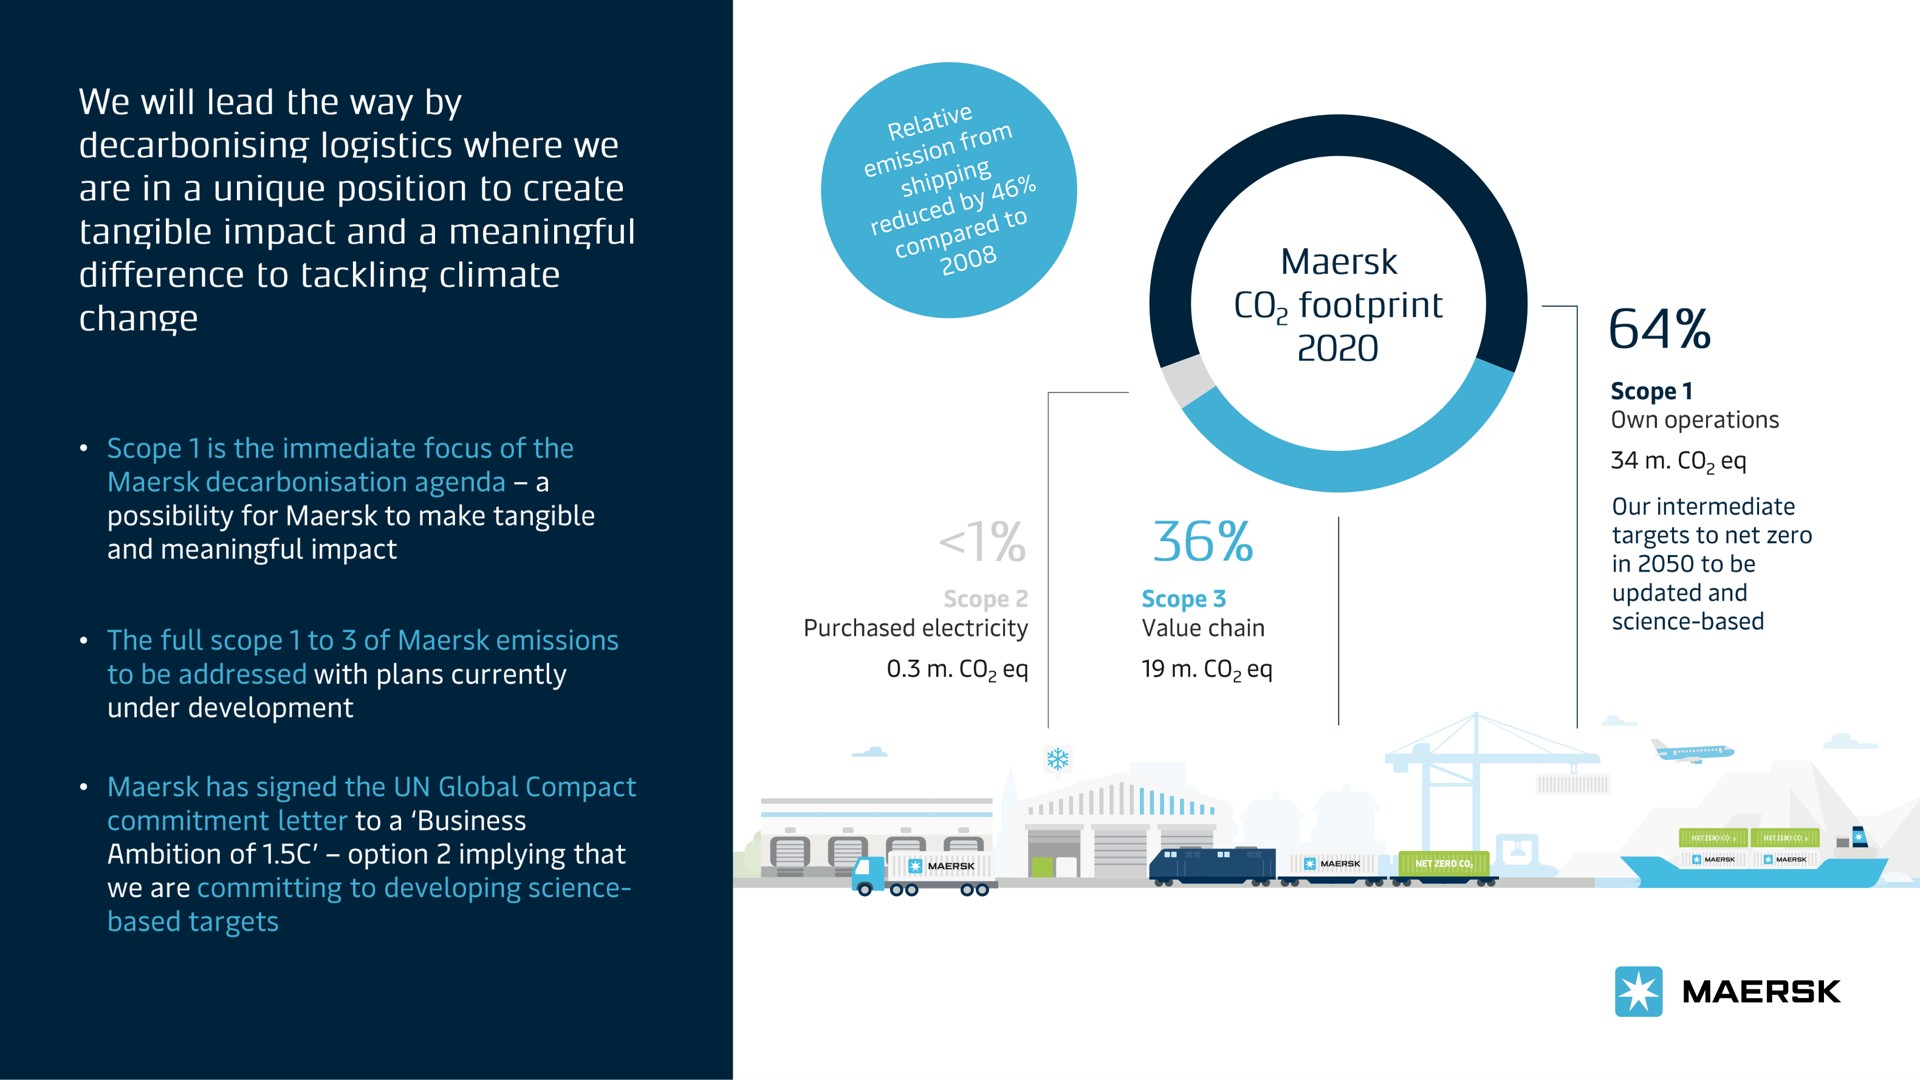 we will lead the way within climate change where we are in a unique position to create true impact by decarbonizing logistics | Maersk